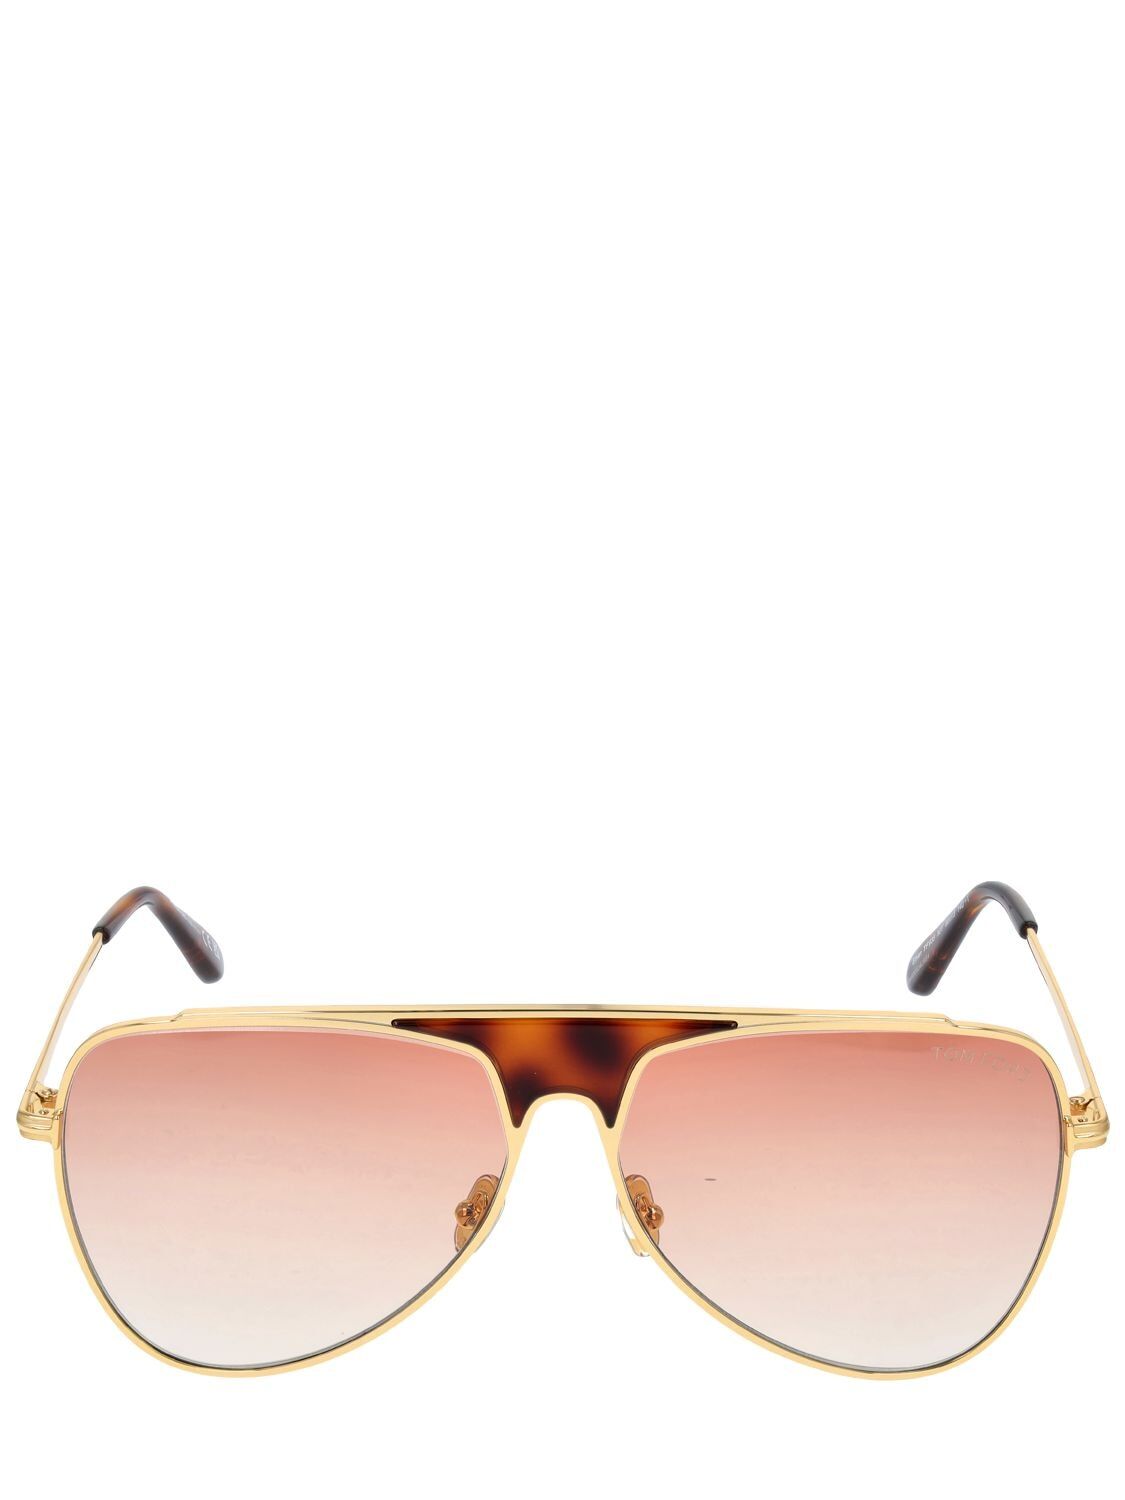 TOM FORD Ethan Metal Sunglasses in gold